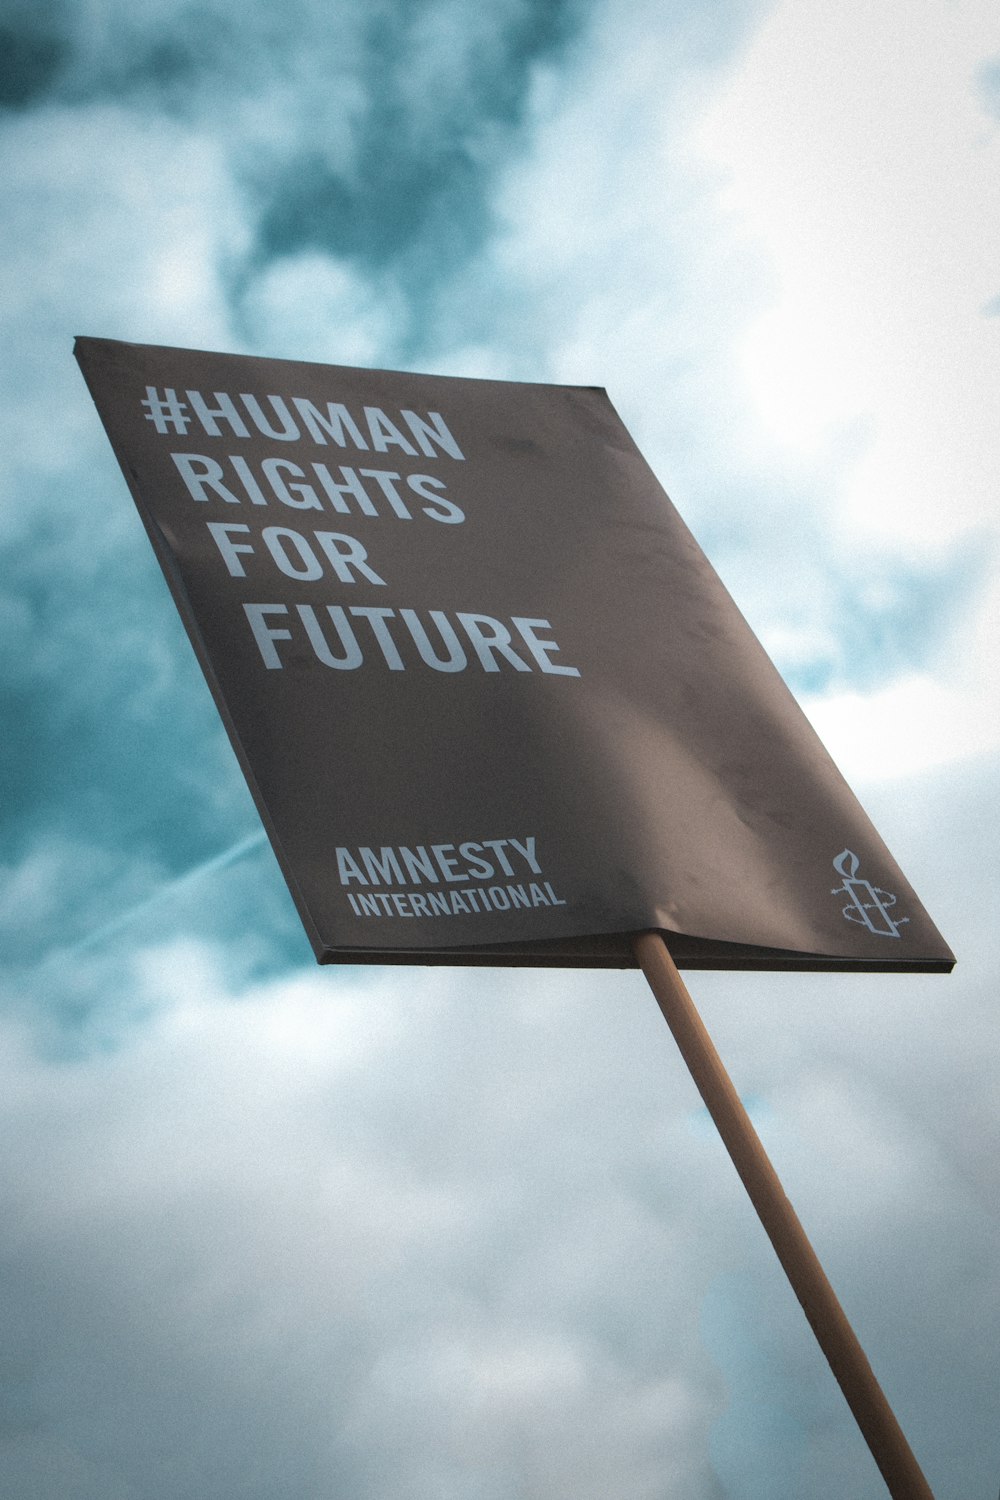 Human Rights For Future signage